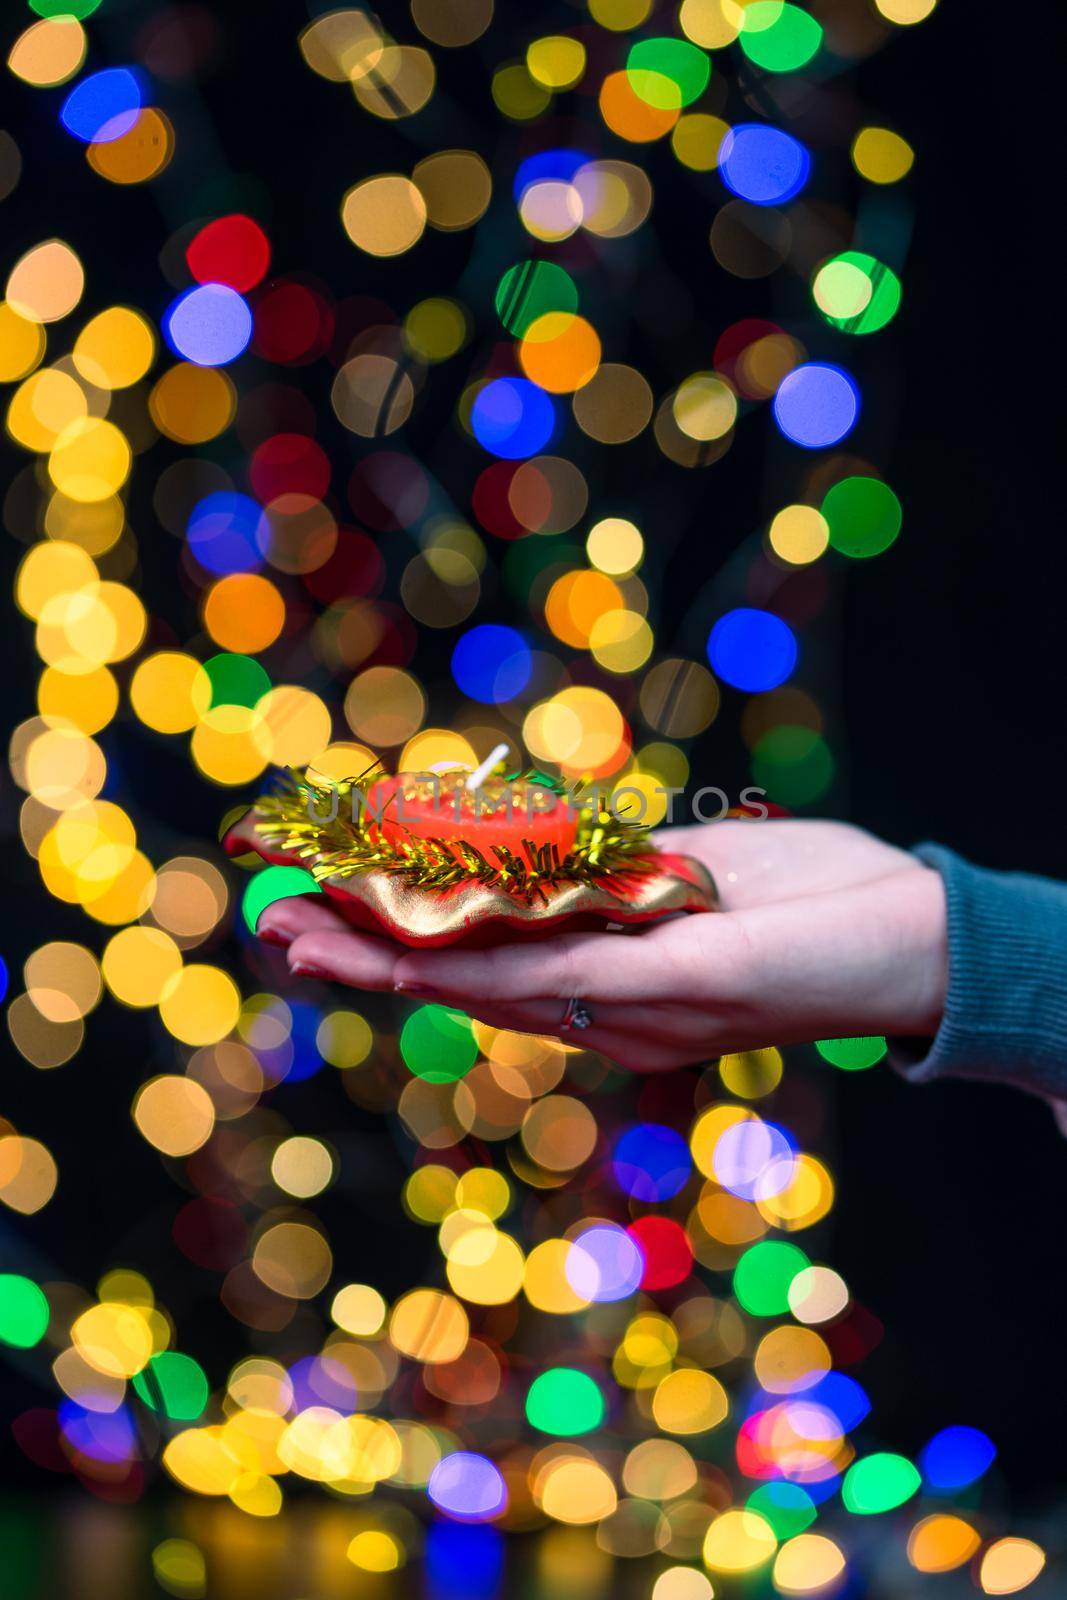 Woman's hands hold christmas decoration. Christmas and New Year holidays background, winter season with Christmas ornaments and blurred lights